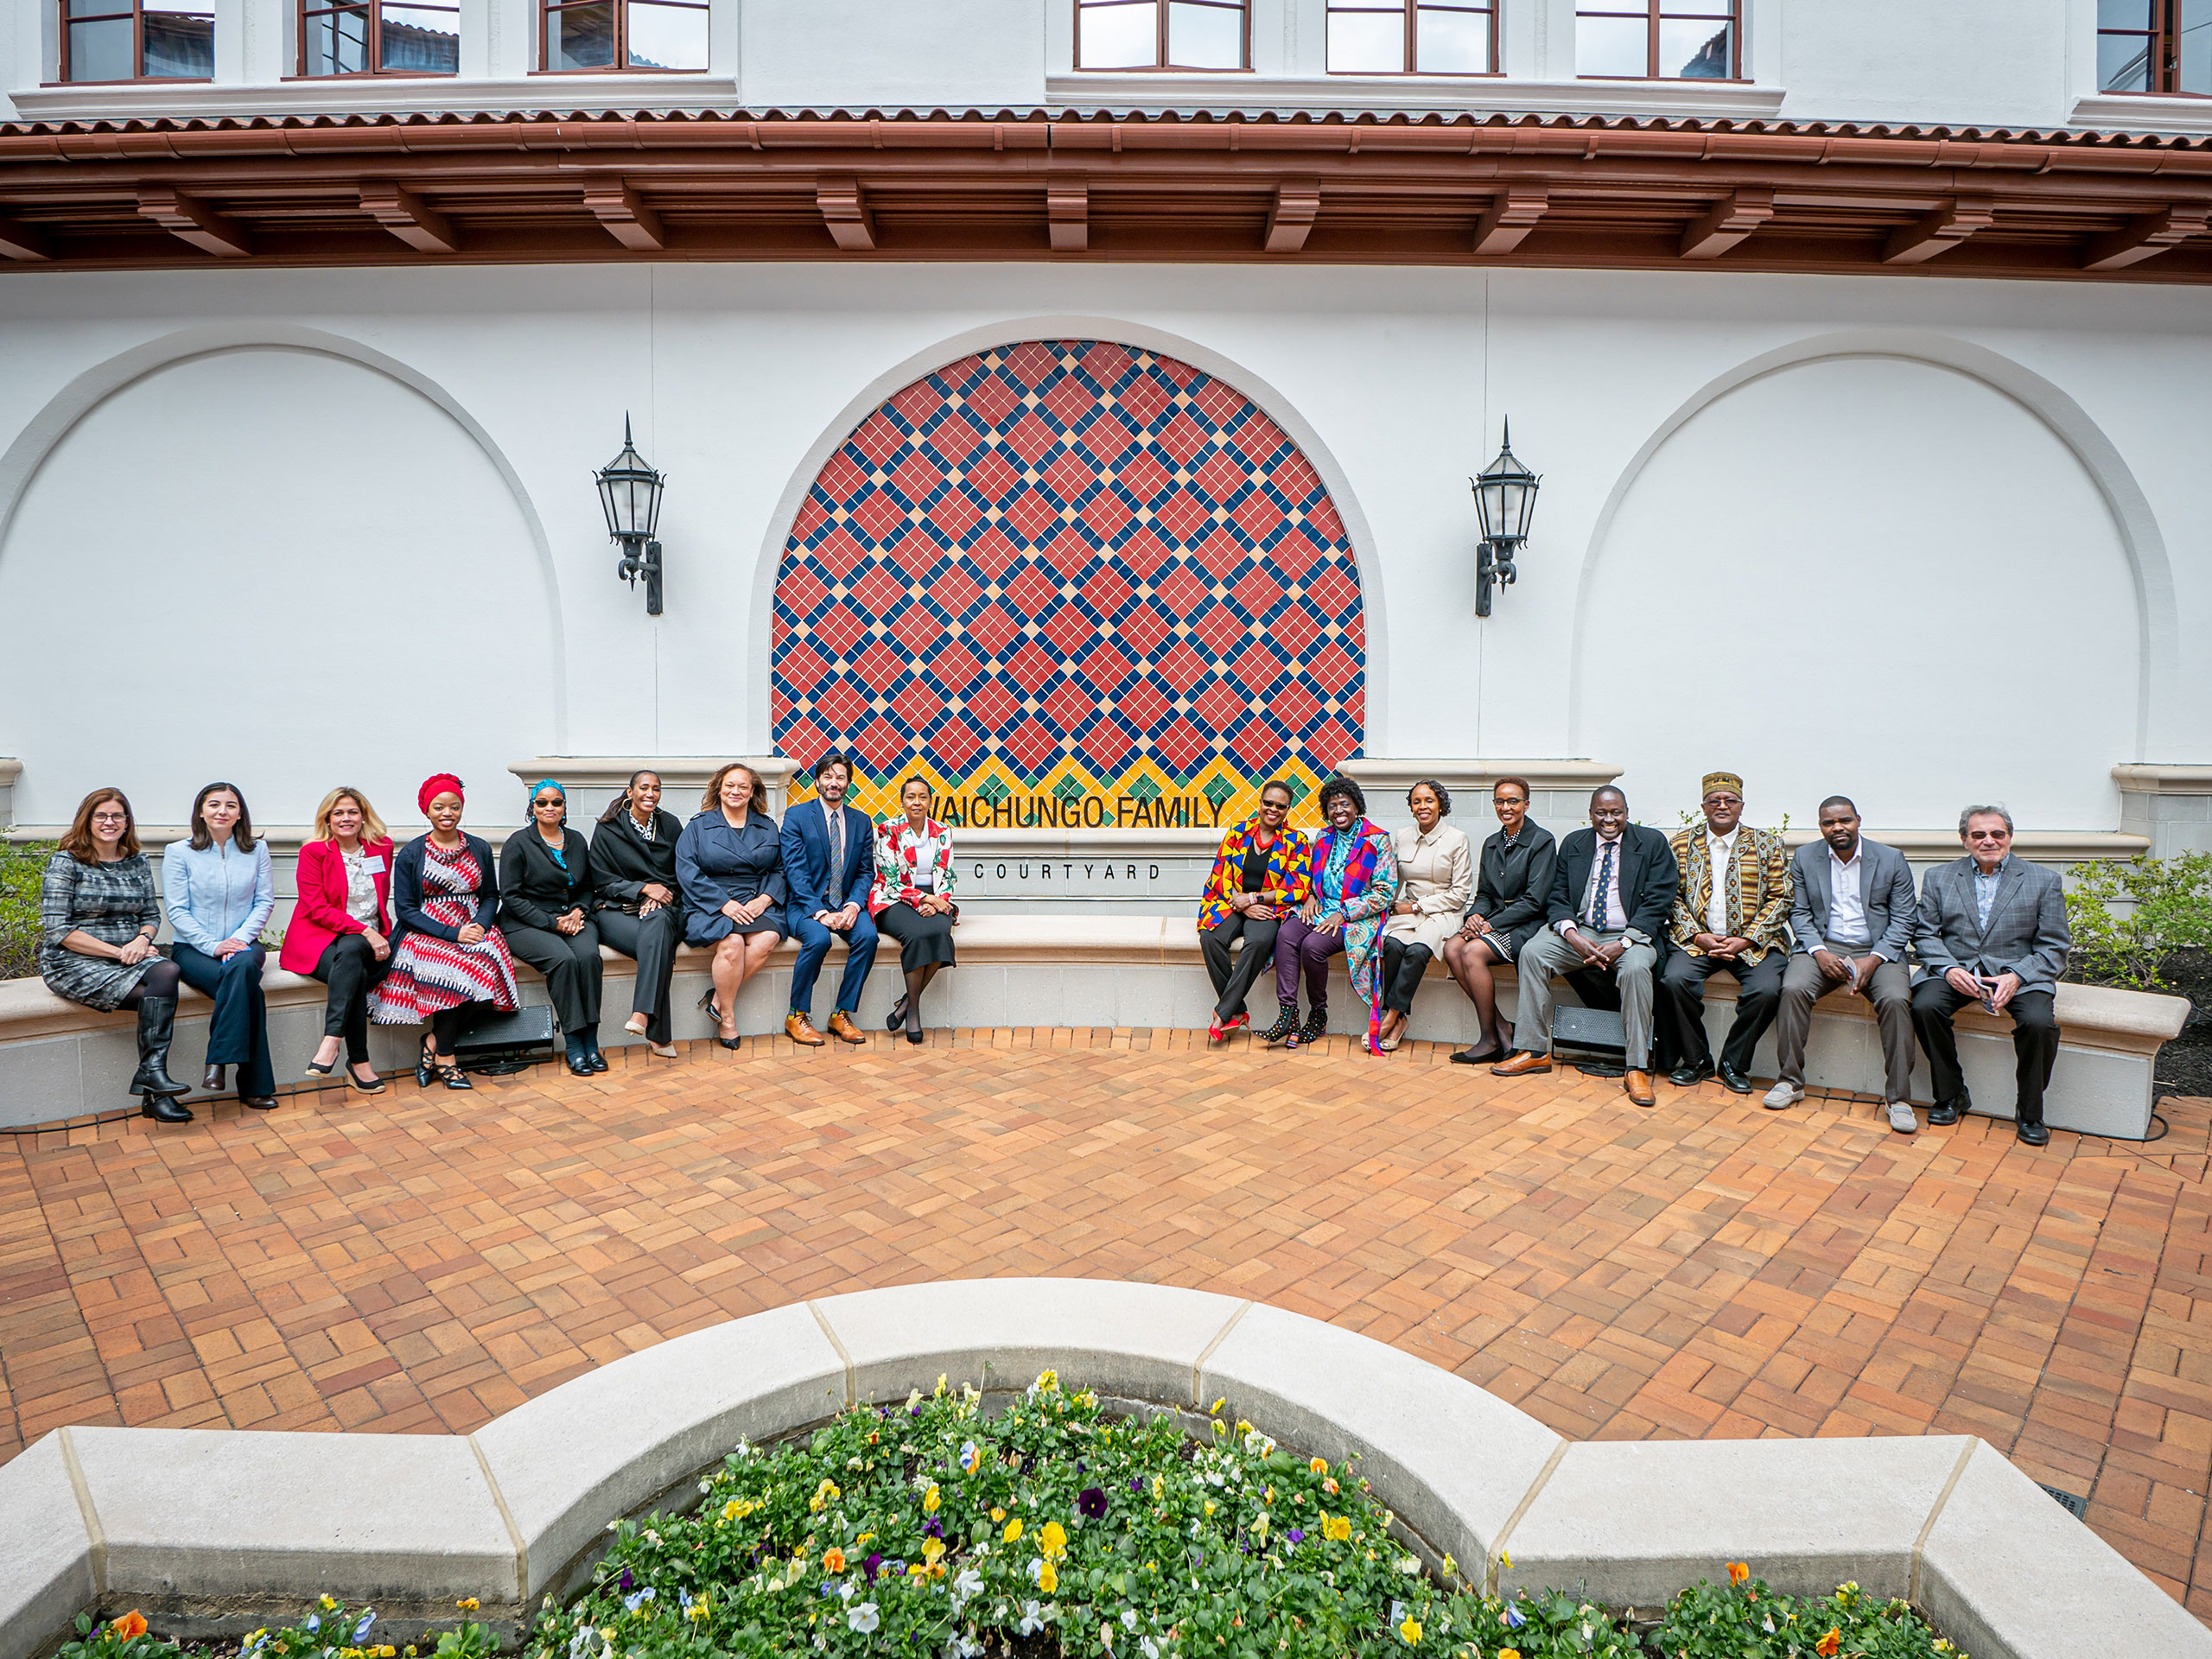 17 people pose in front of the Waichungo Family Courtyard mosaic sign.